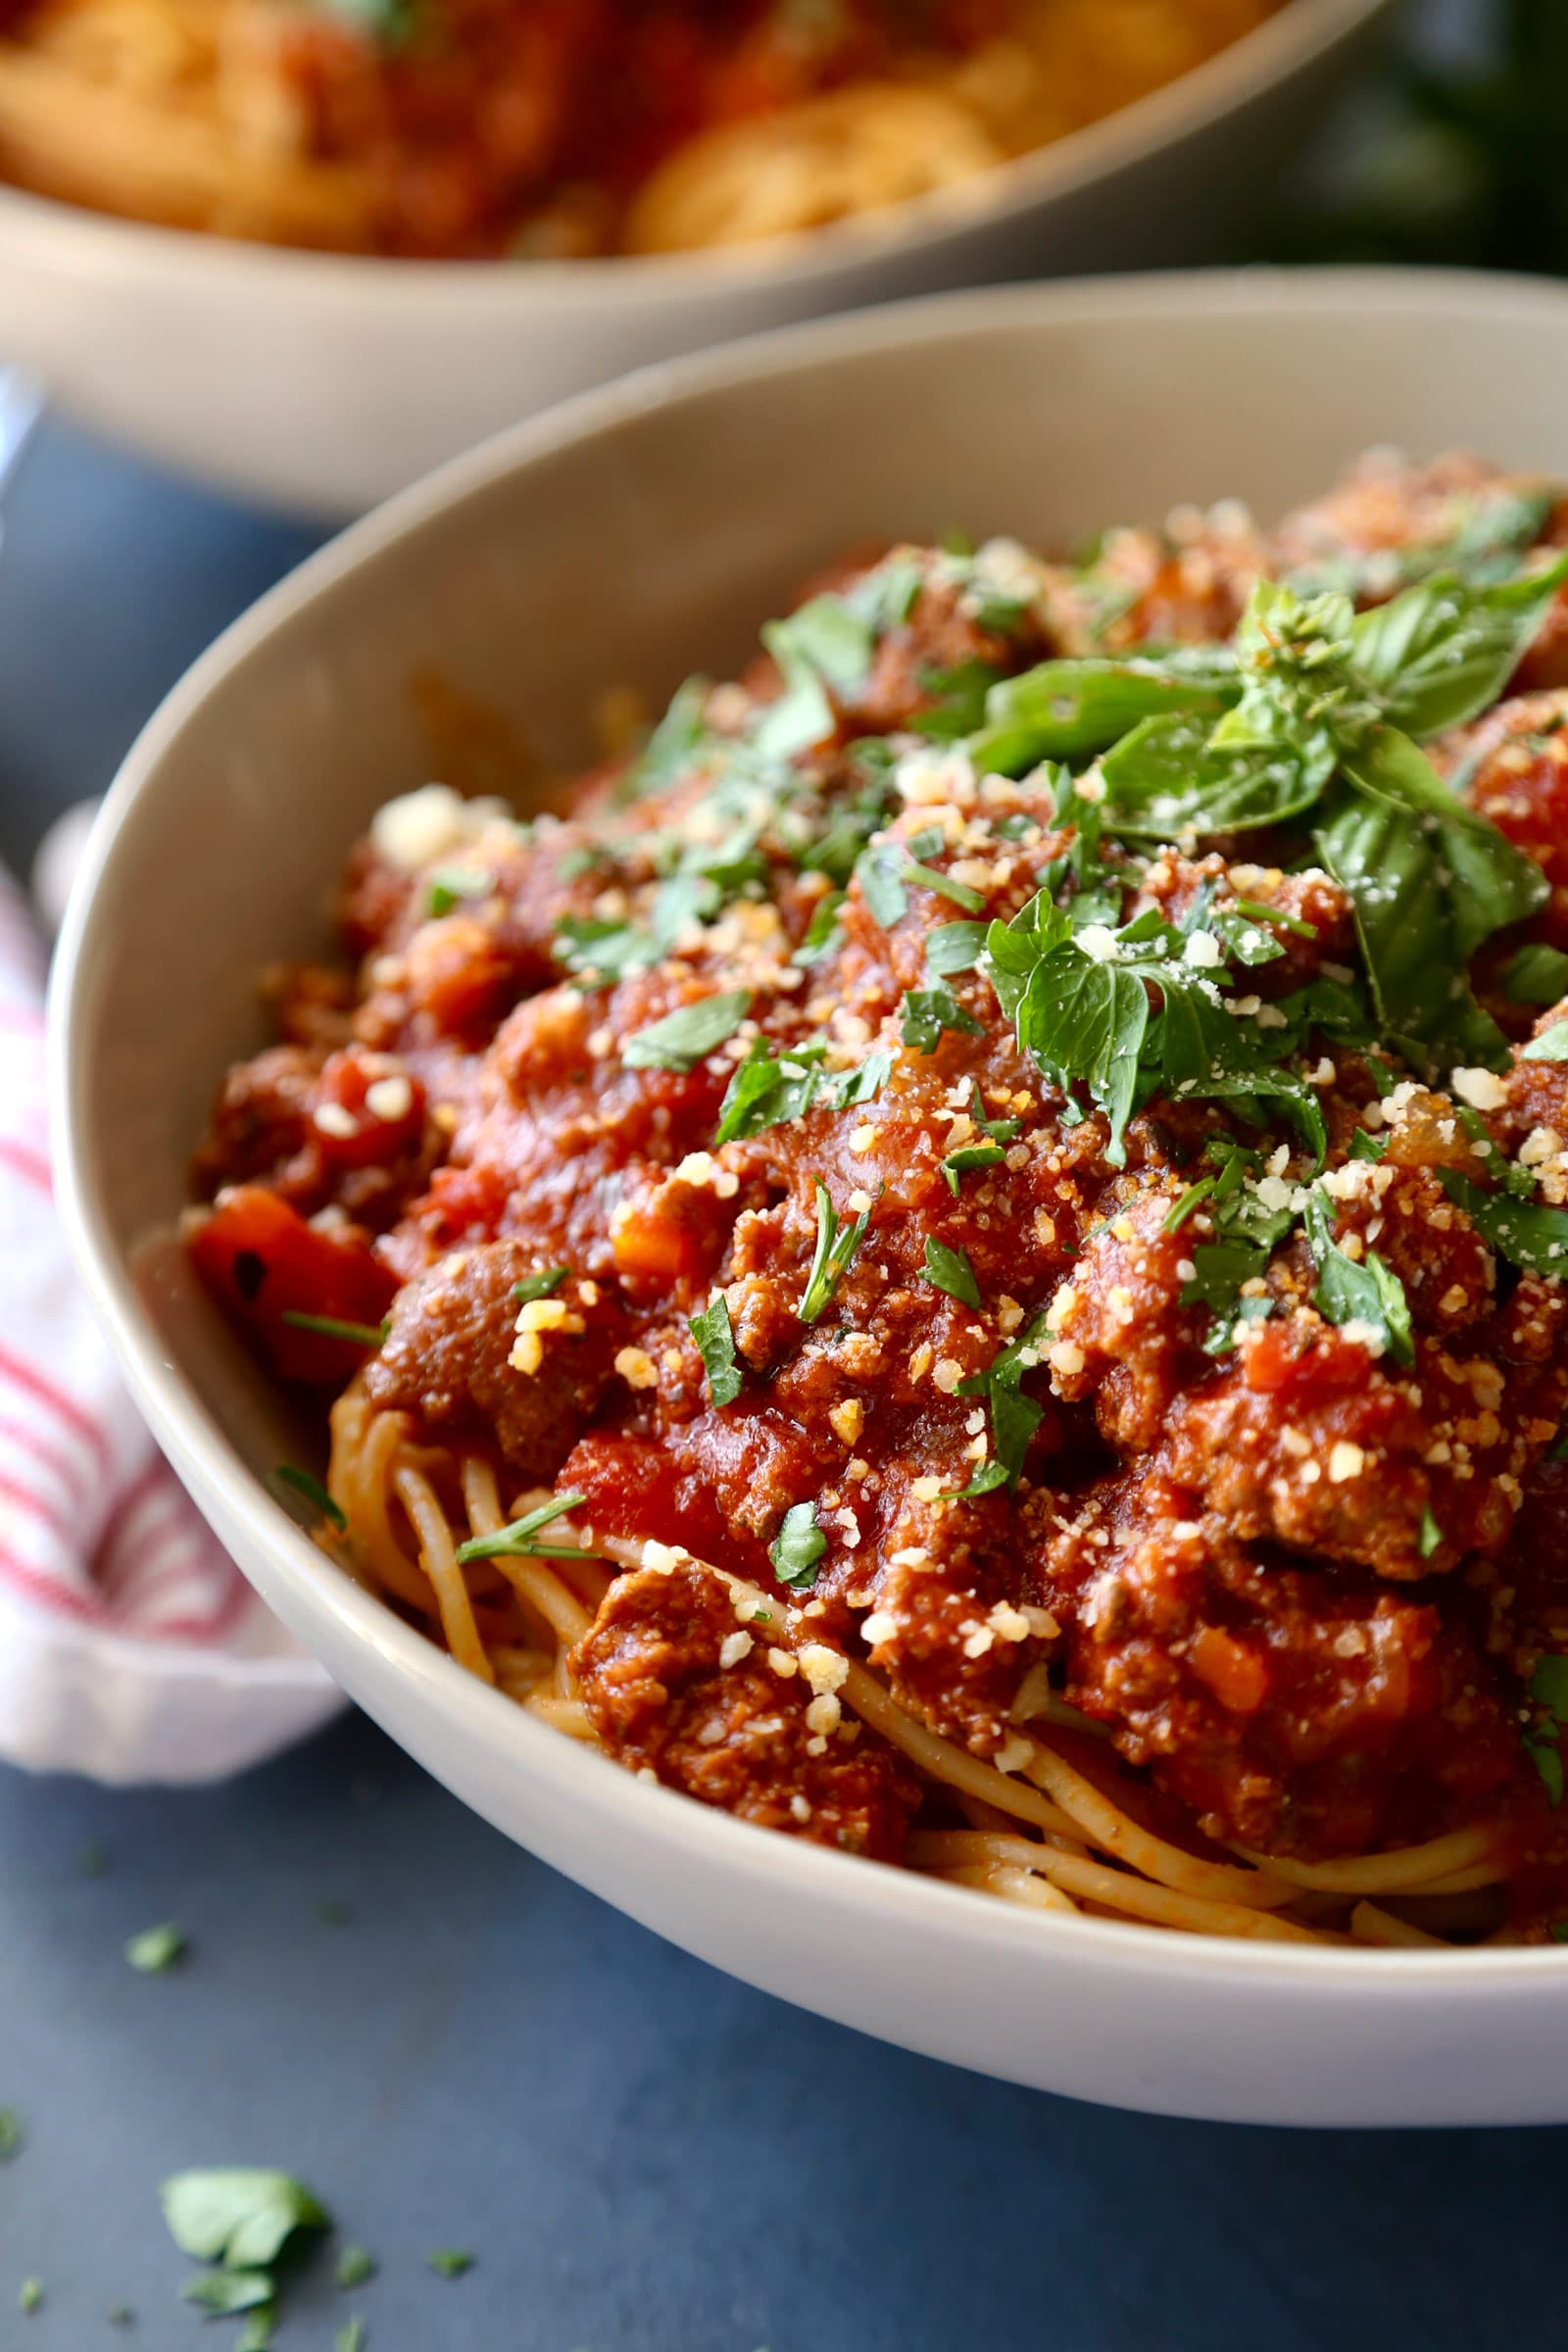 Slow Cooker Spaghetti Bolognese Sauce | Perfect for a weeknight dinner, this bolognese-style sauce is made in the slow cooker.  Just boil some pasta and your dinner is ready! | https://thechunkychef.com